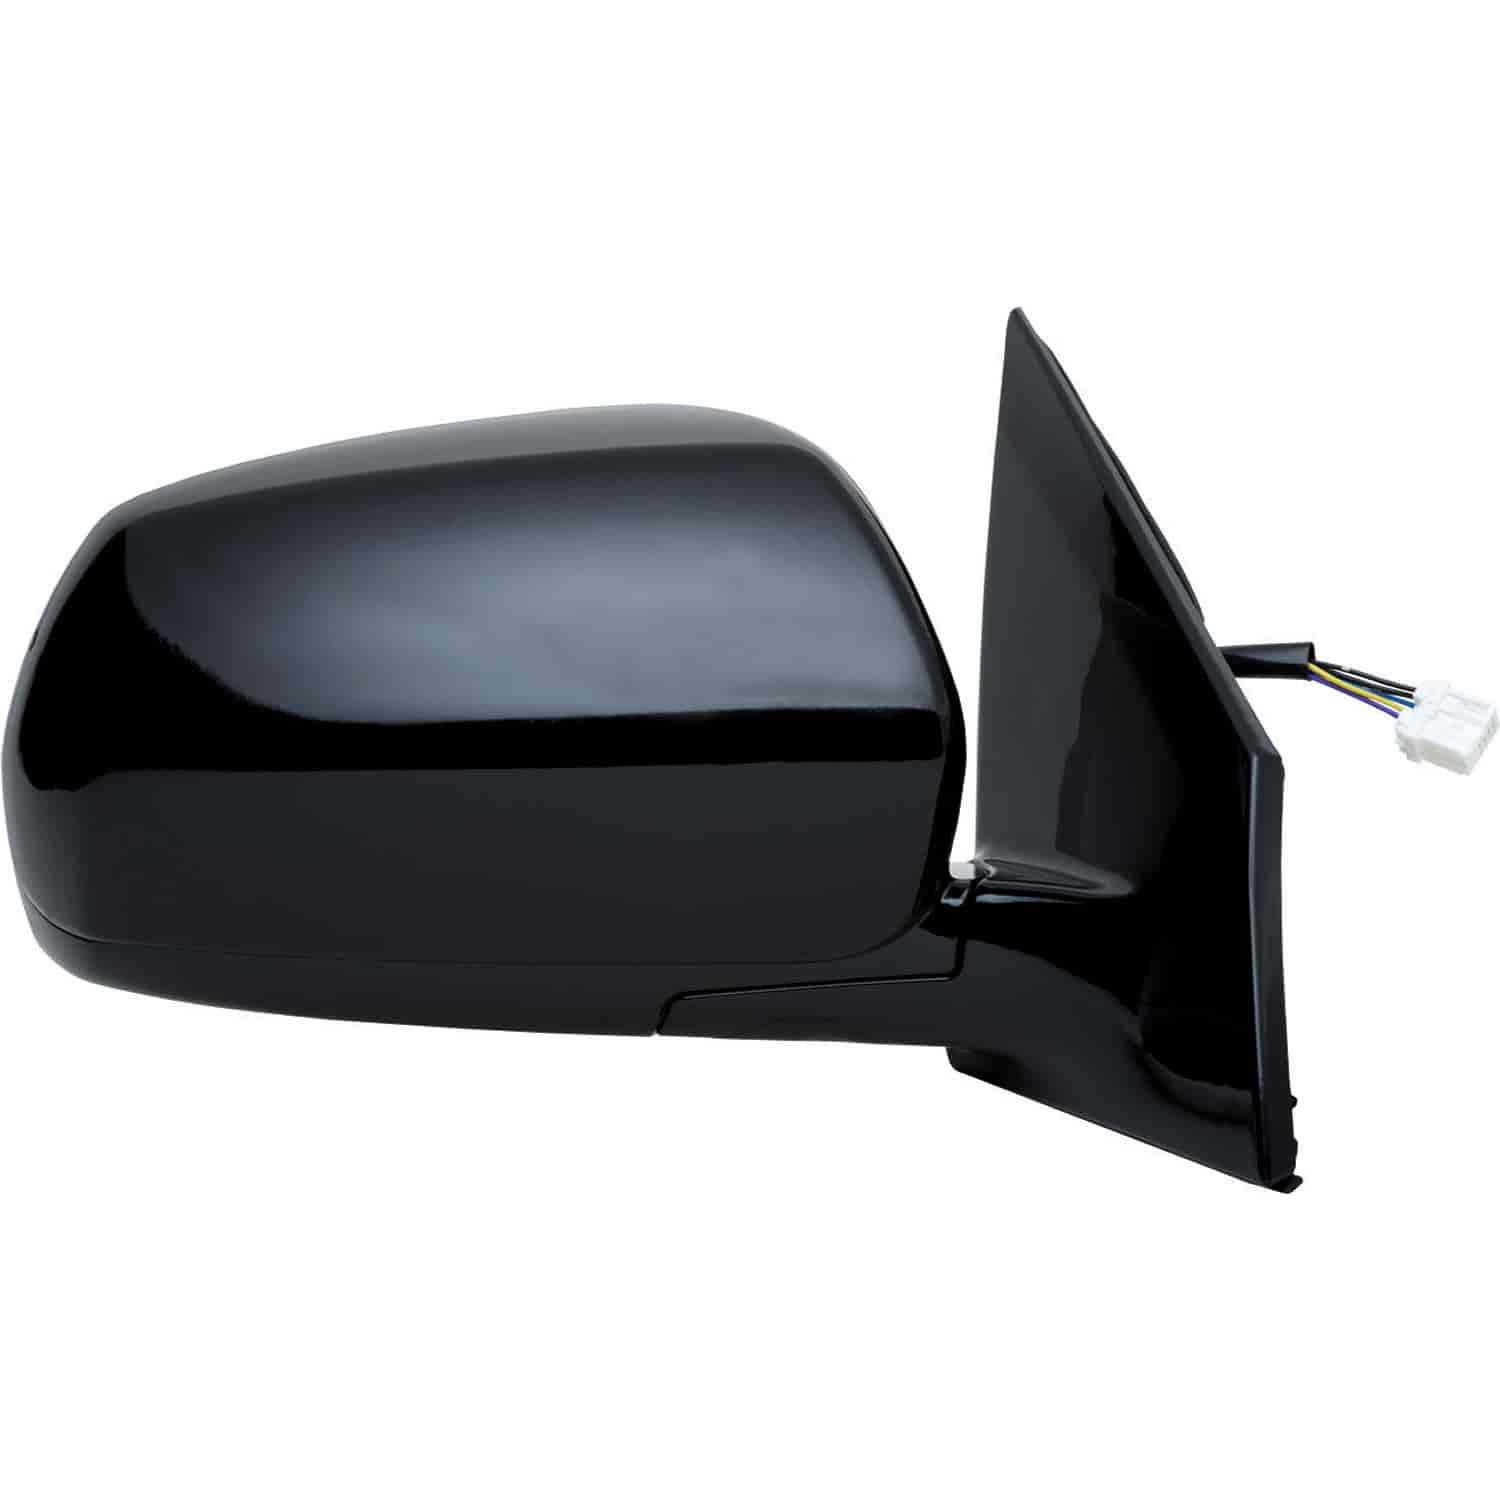 OEM Style Replacement mirror for 03-04 Nissan Murano passenger side mirror tested to fit and functio